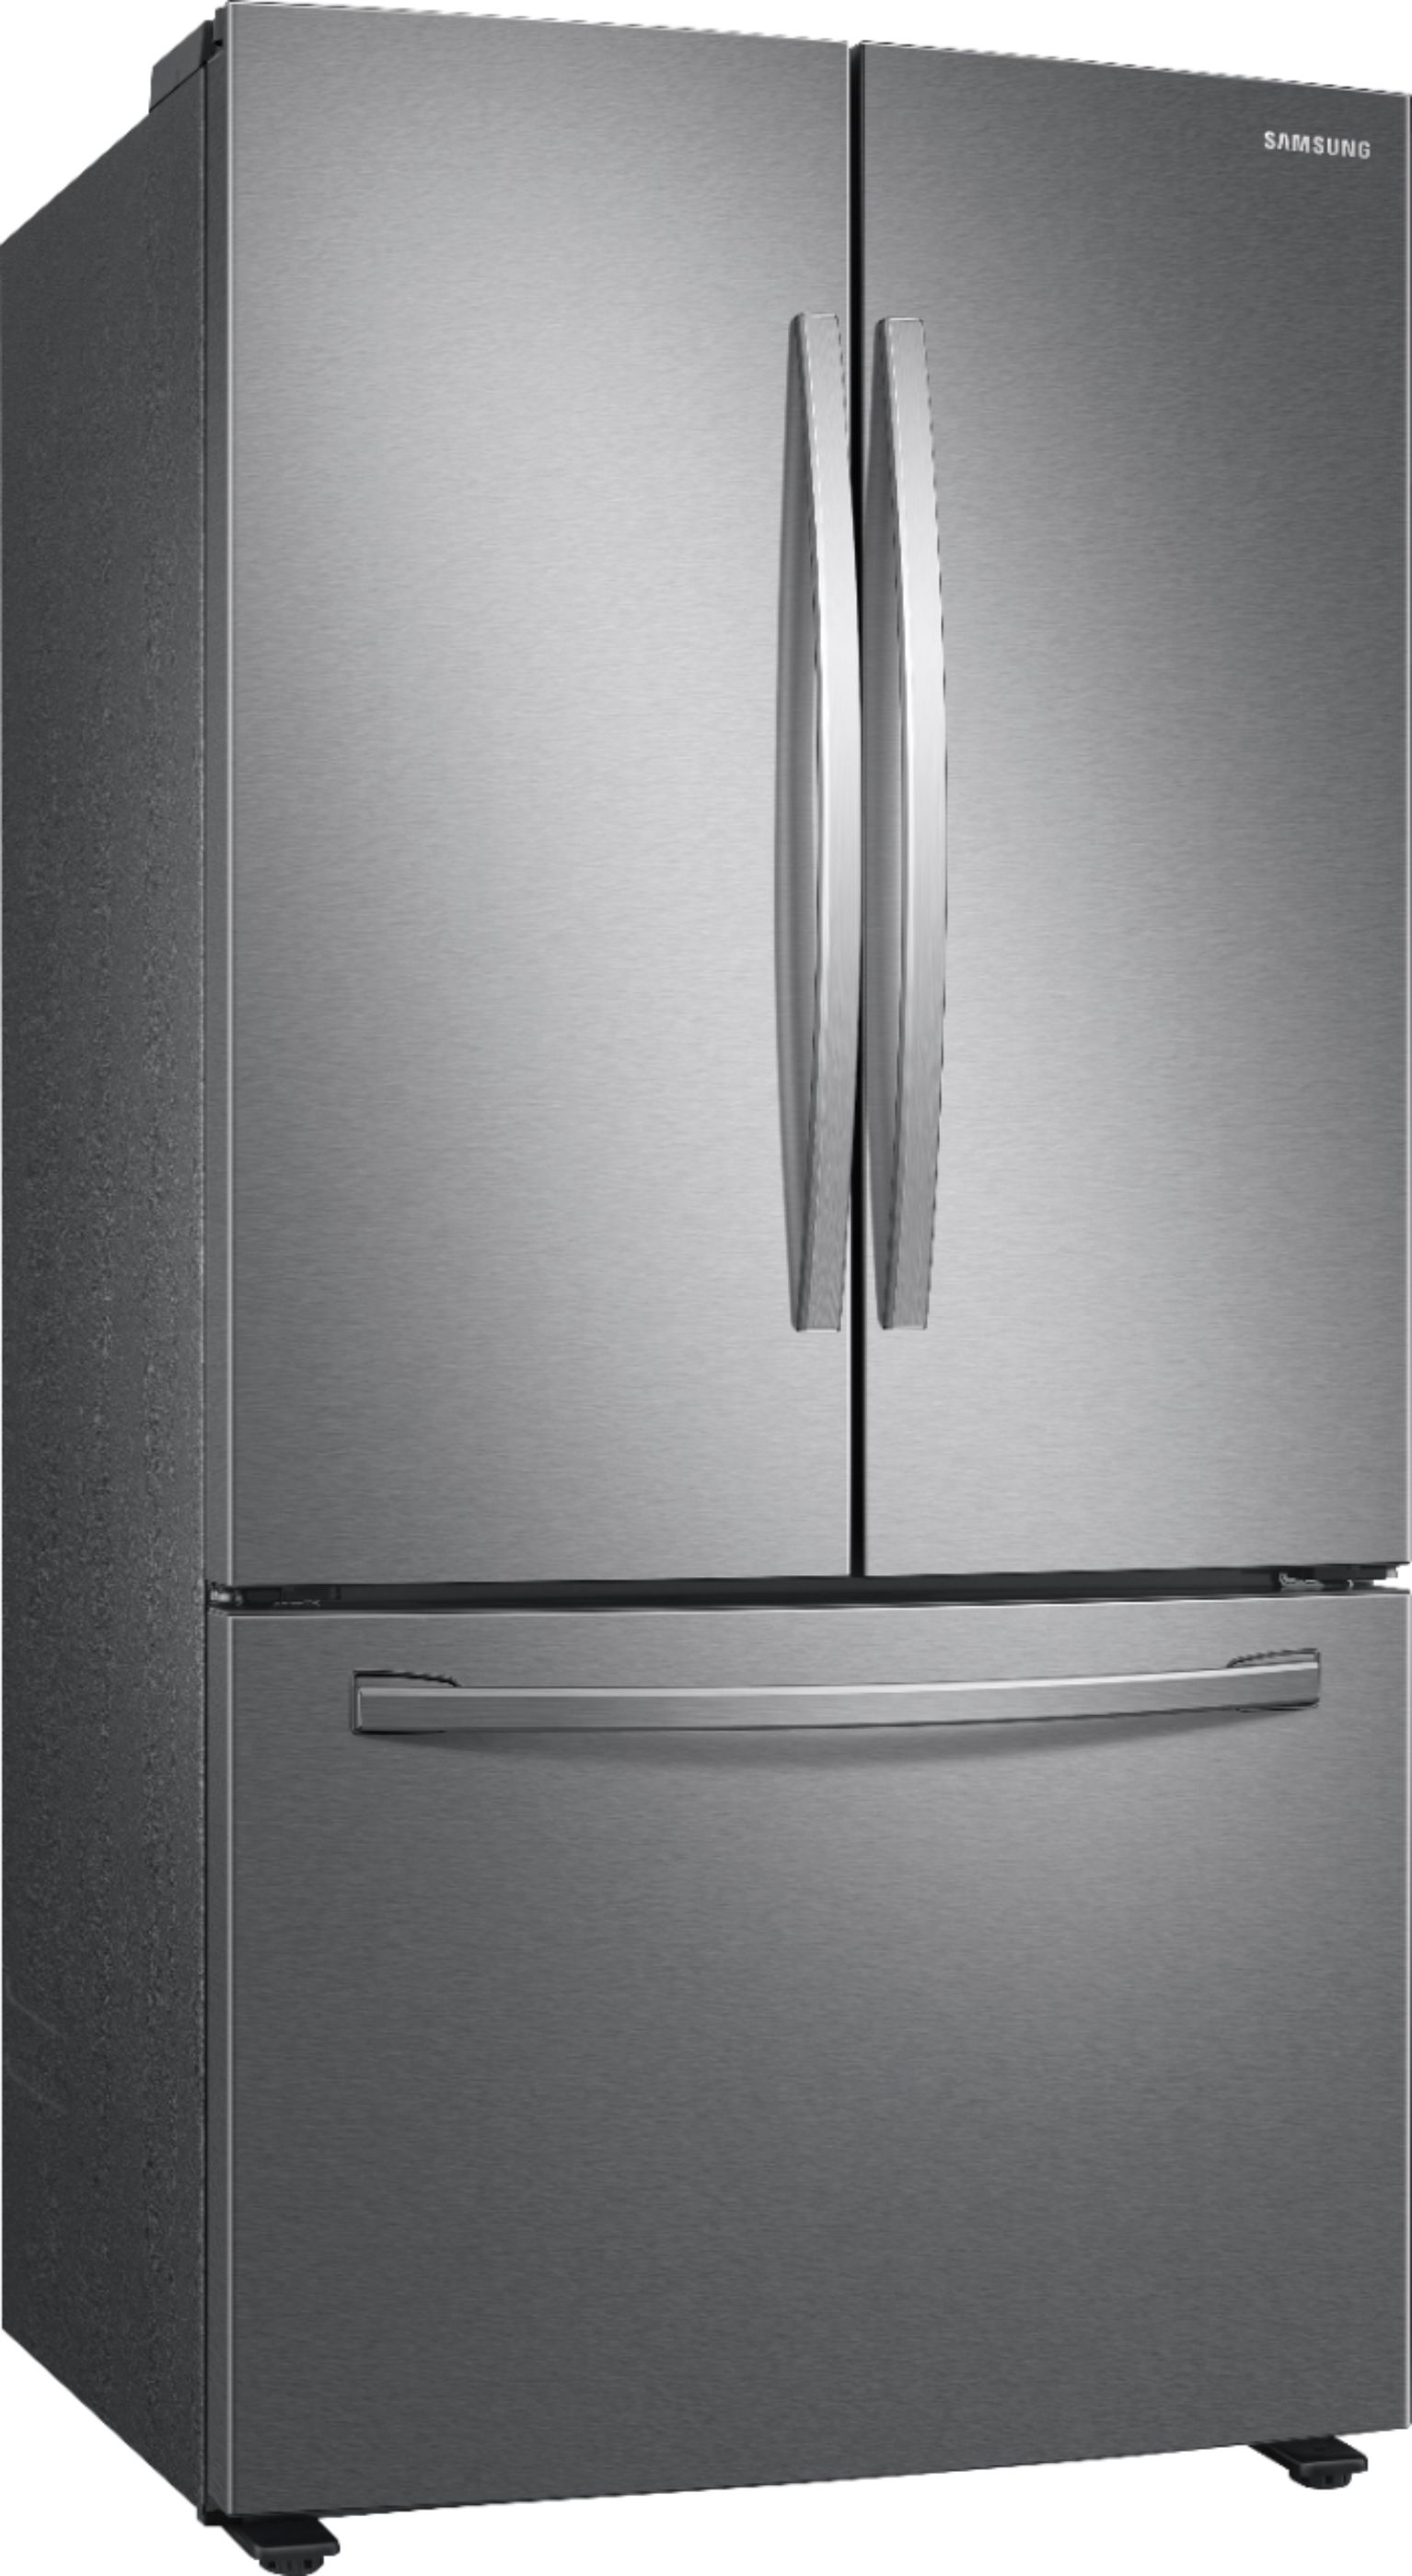 Angle View: Samsung - 28 cu. ft. Large Capacity 3-Door French Door Refrigerator with Internal Water Dispenser - Stainless steel